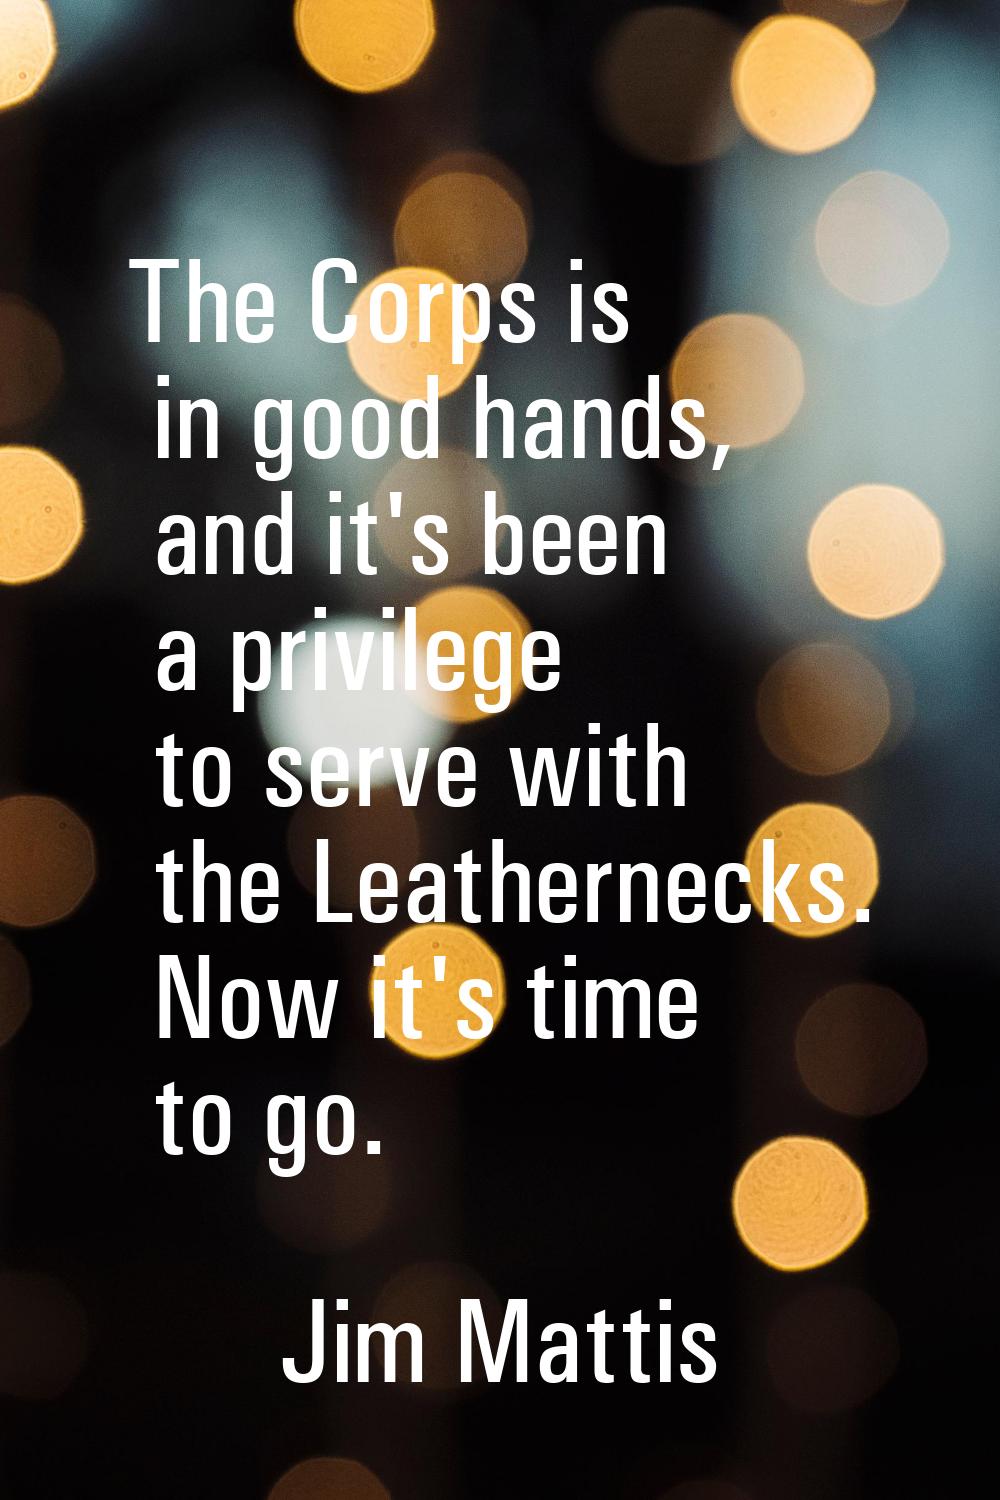 The Corps is in good hands, and it's been a privilege to serve with the Leathernecks. Now it's time